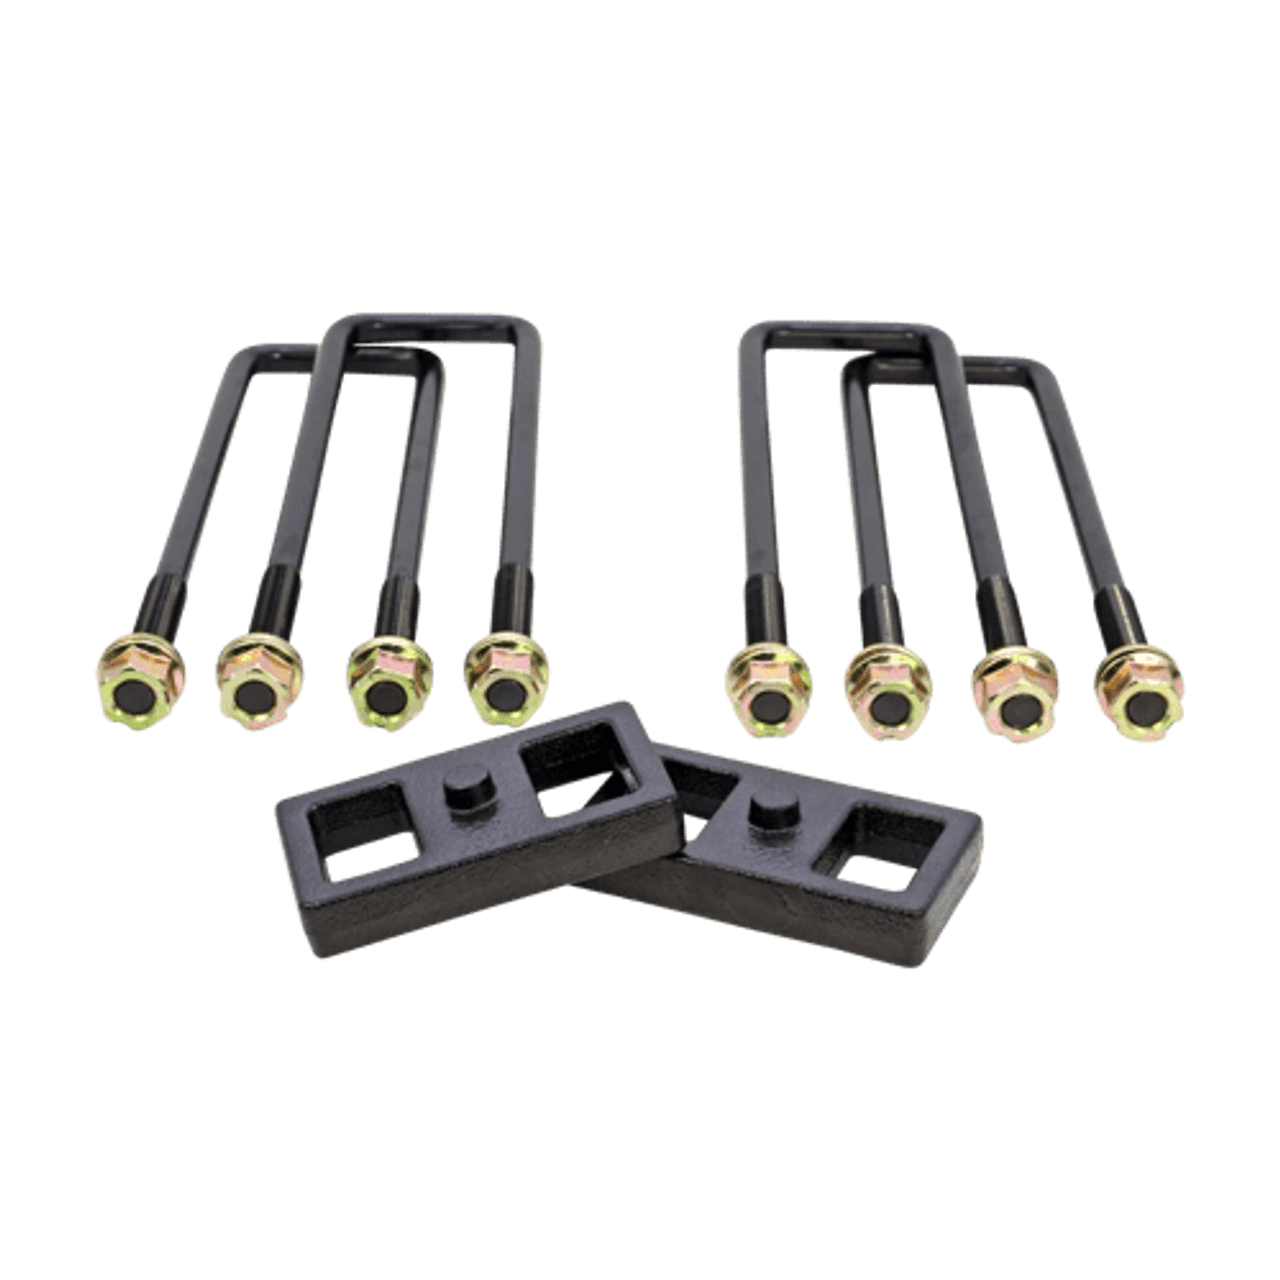 1'' Rear Block Kit for use with Factory Top Overloads